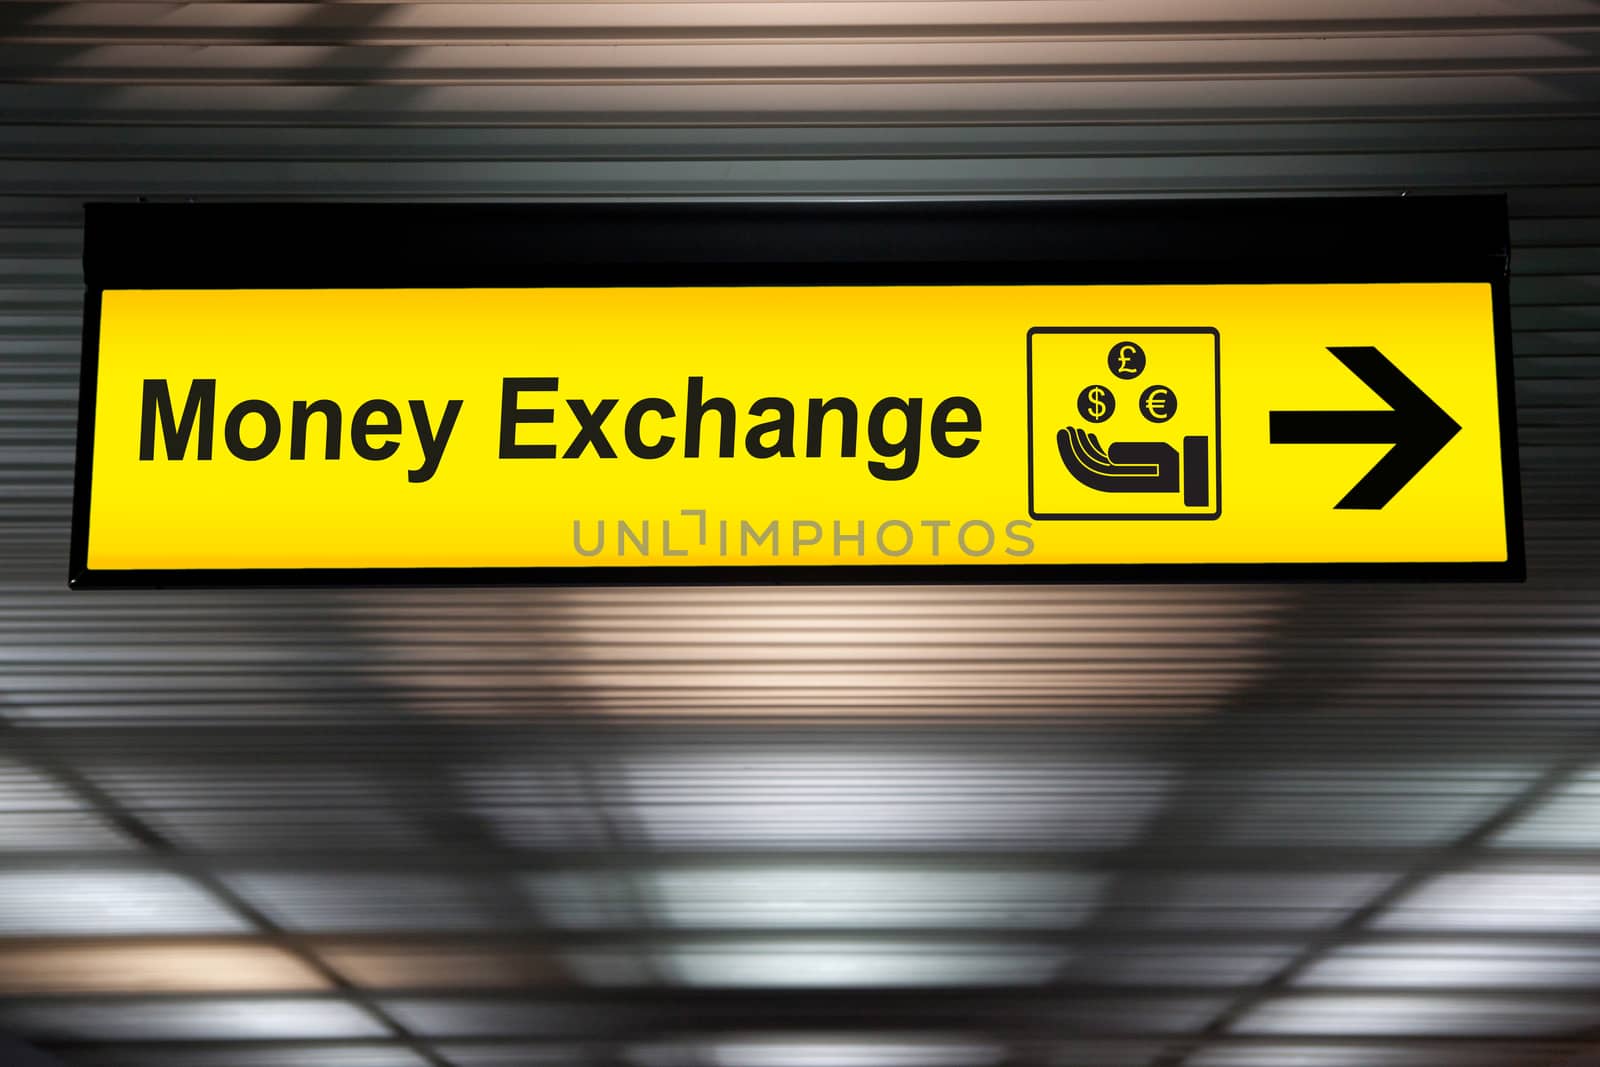 Money exchange sign at the airport